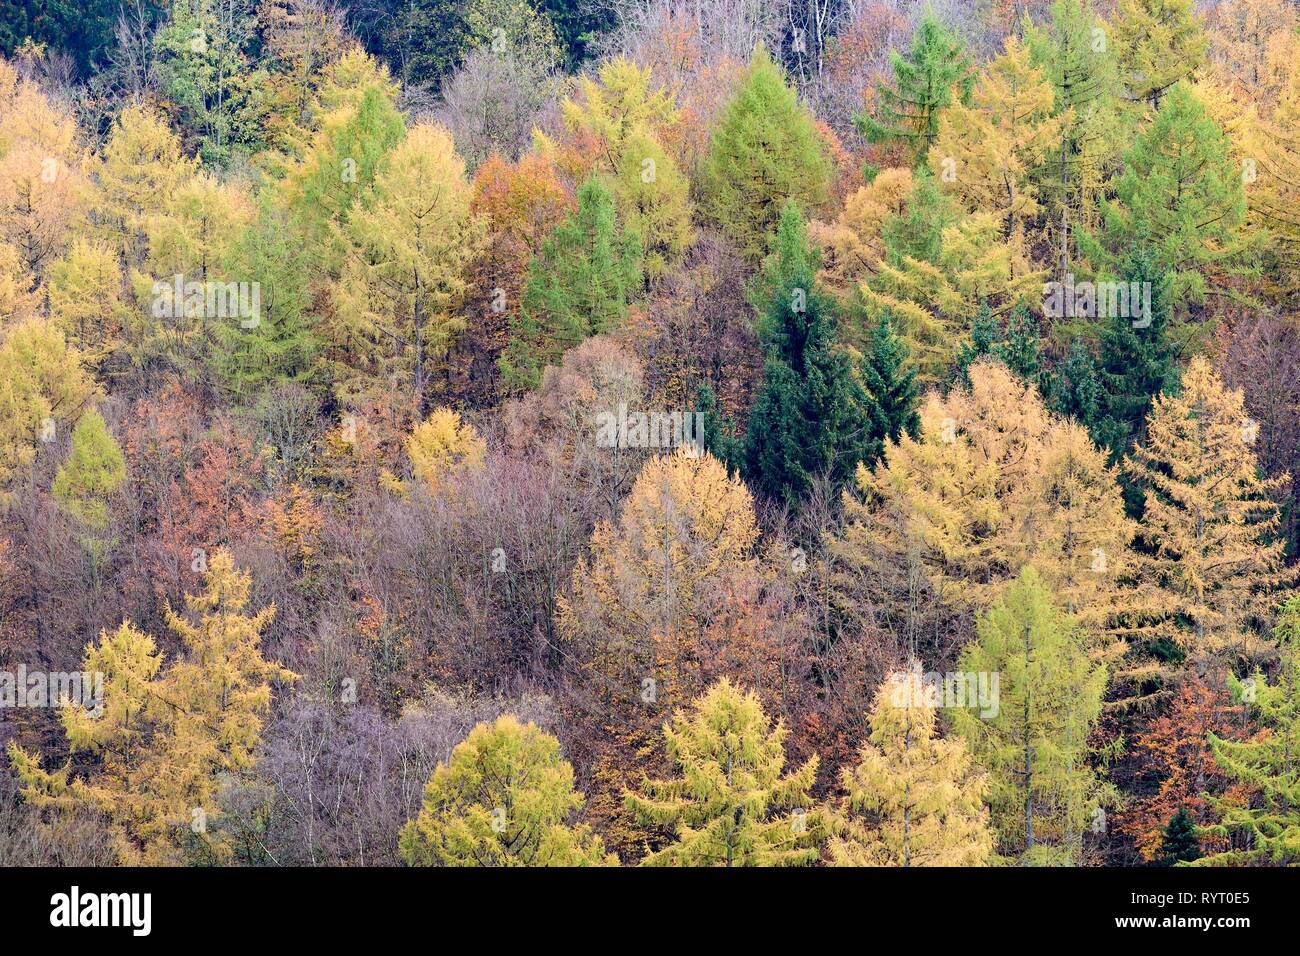 Mixed forest with Larches (Larix), spruces (Picea abies) and Common beeches (Fagus sylvatica) in autumn, Sauerland-Rothaar Stock Photo